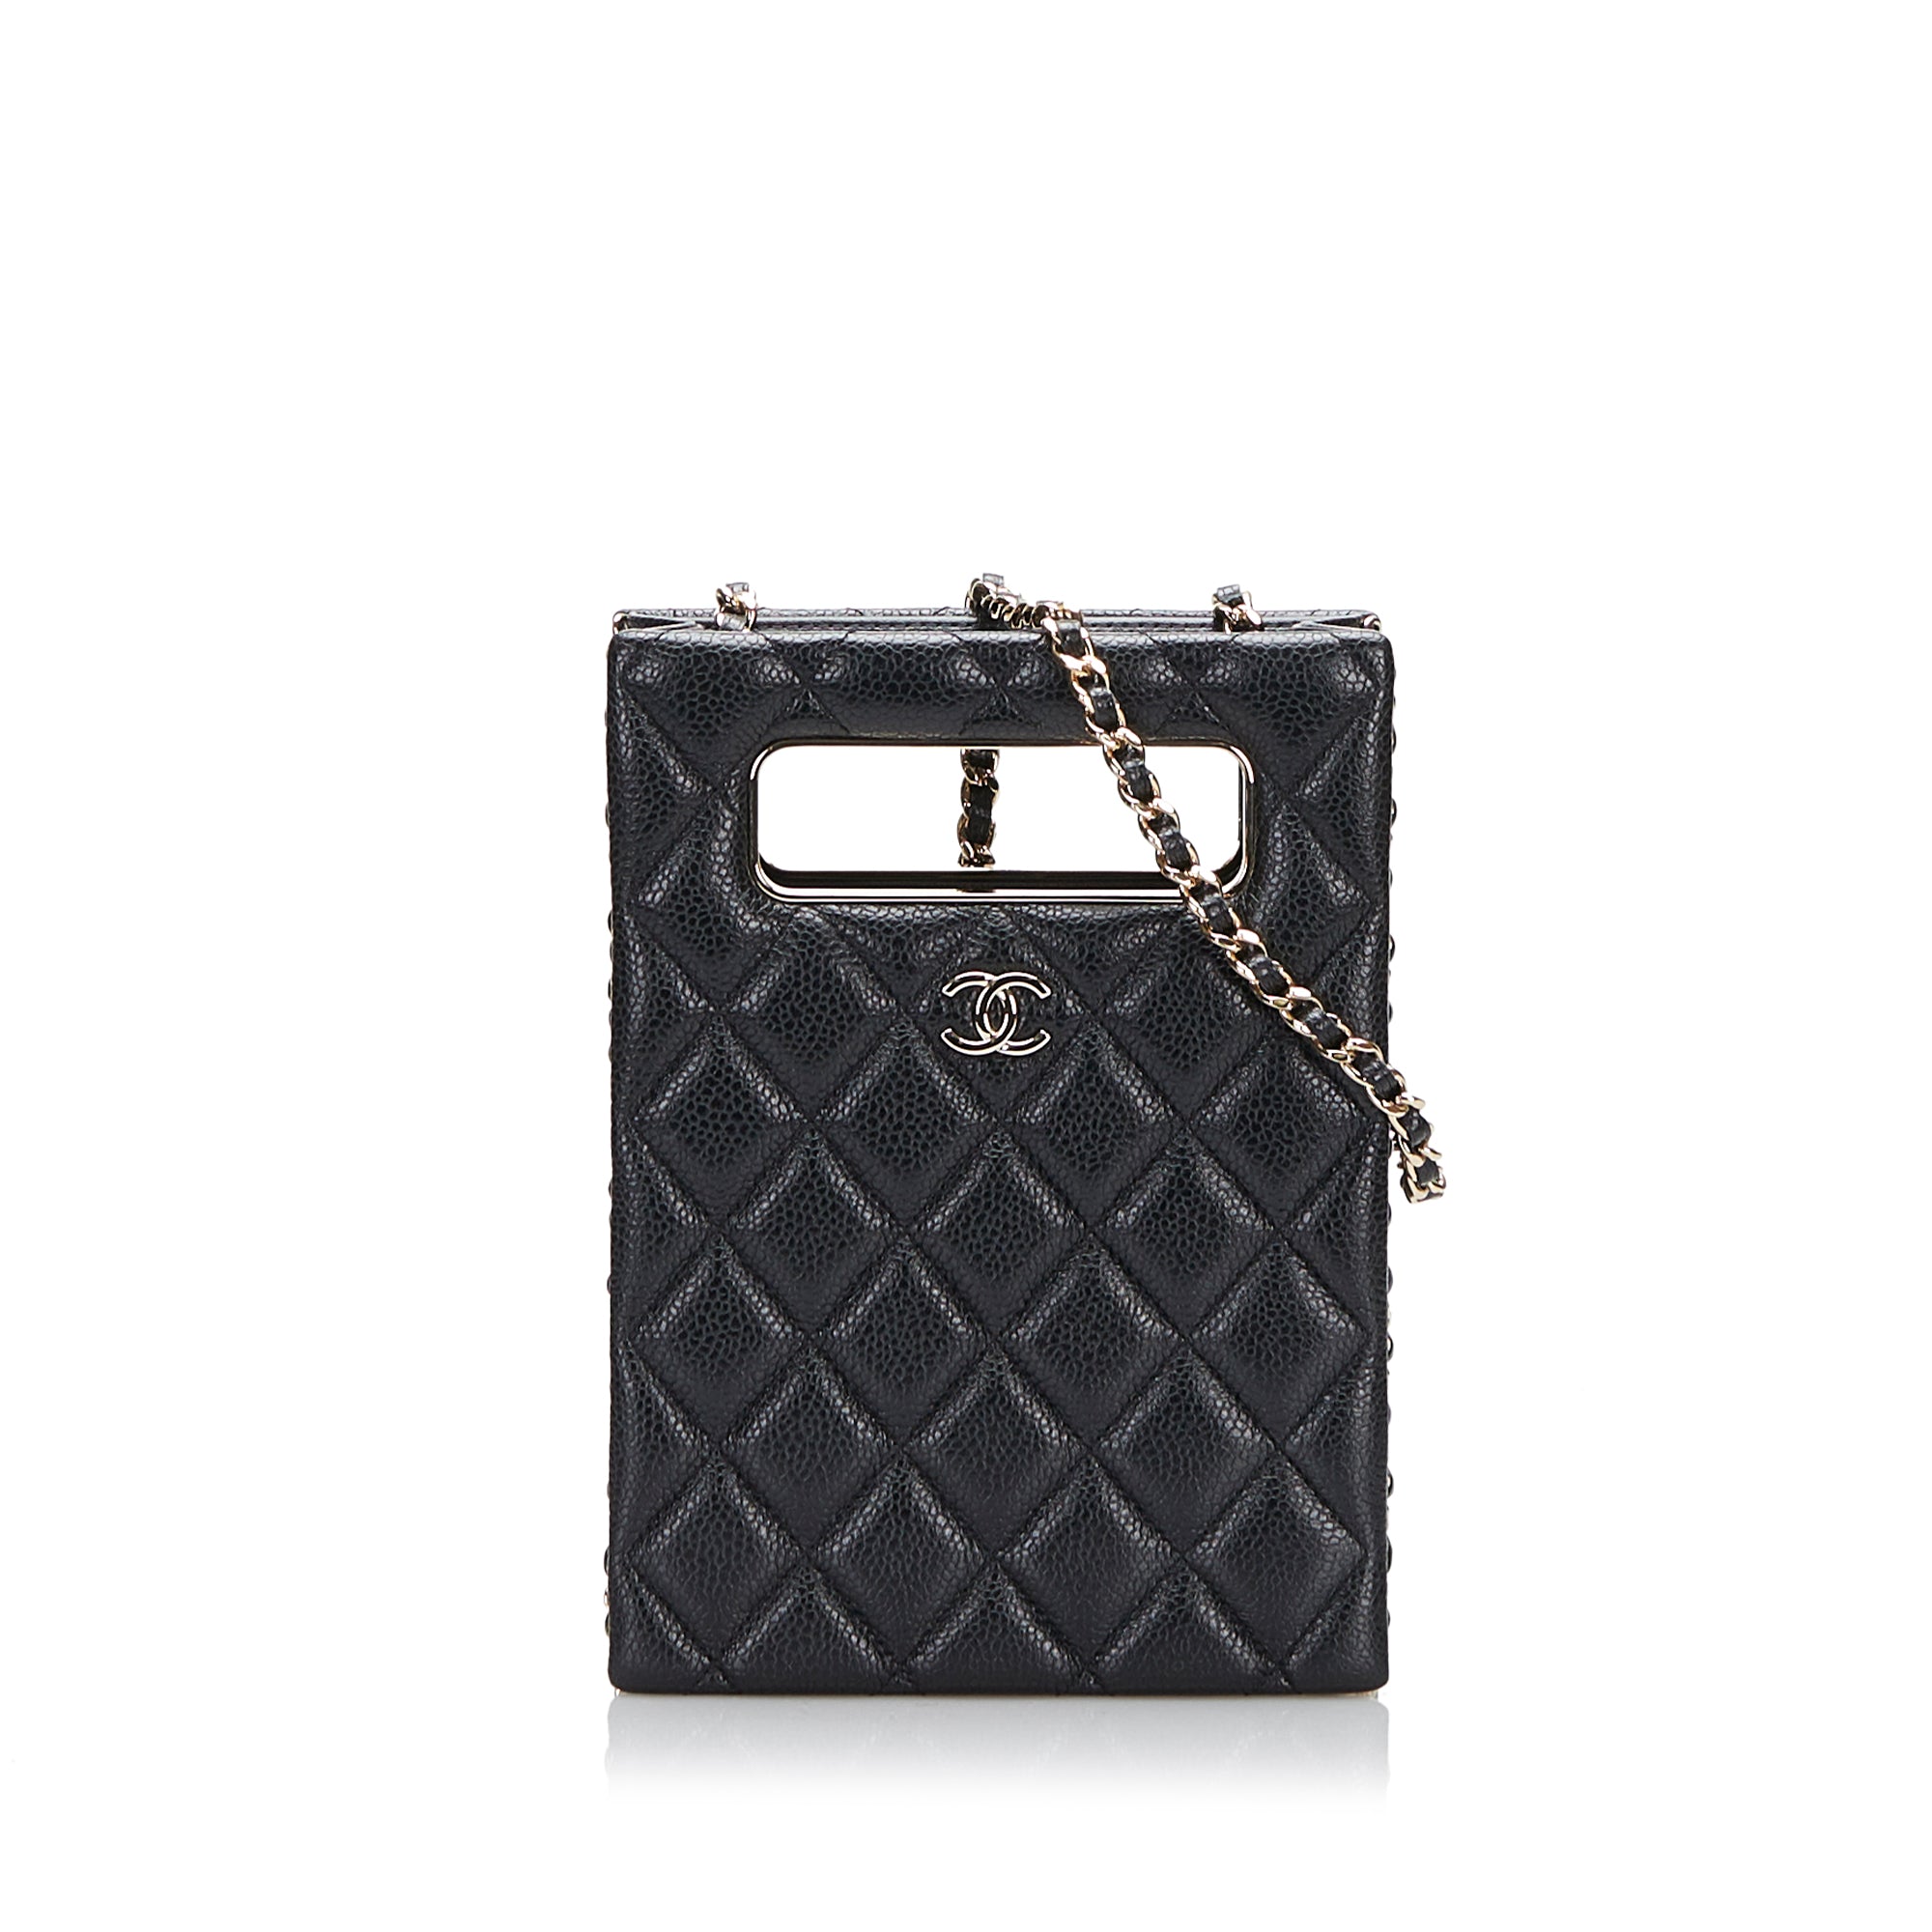 Chanel Black Quilted Leather Phone Holder Crossbody Bag